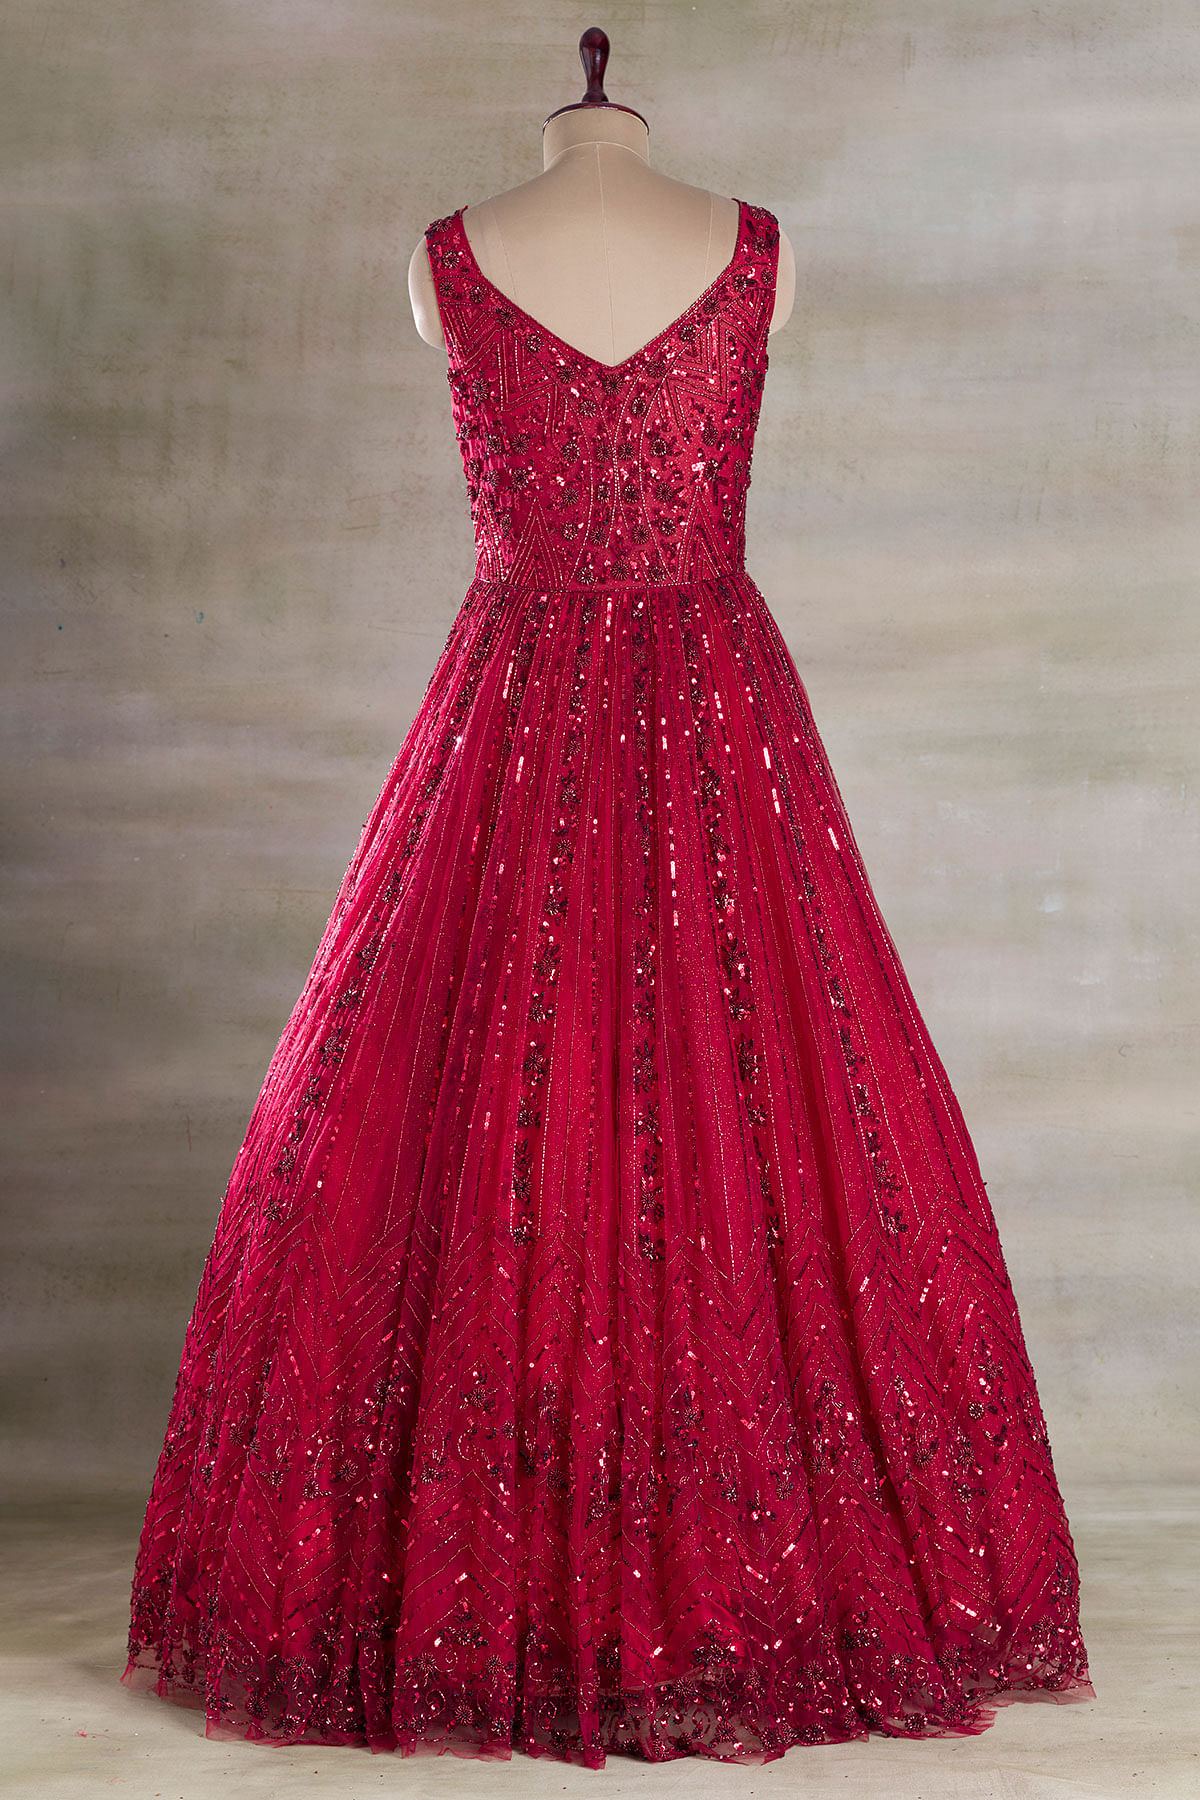 W-+91-9725516626///RED NET SEQUENCE WORK 3 LAYER STITCHED GOWN | Gowns,  Ruffles fashion, Gown pattern